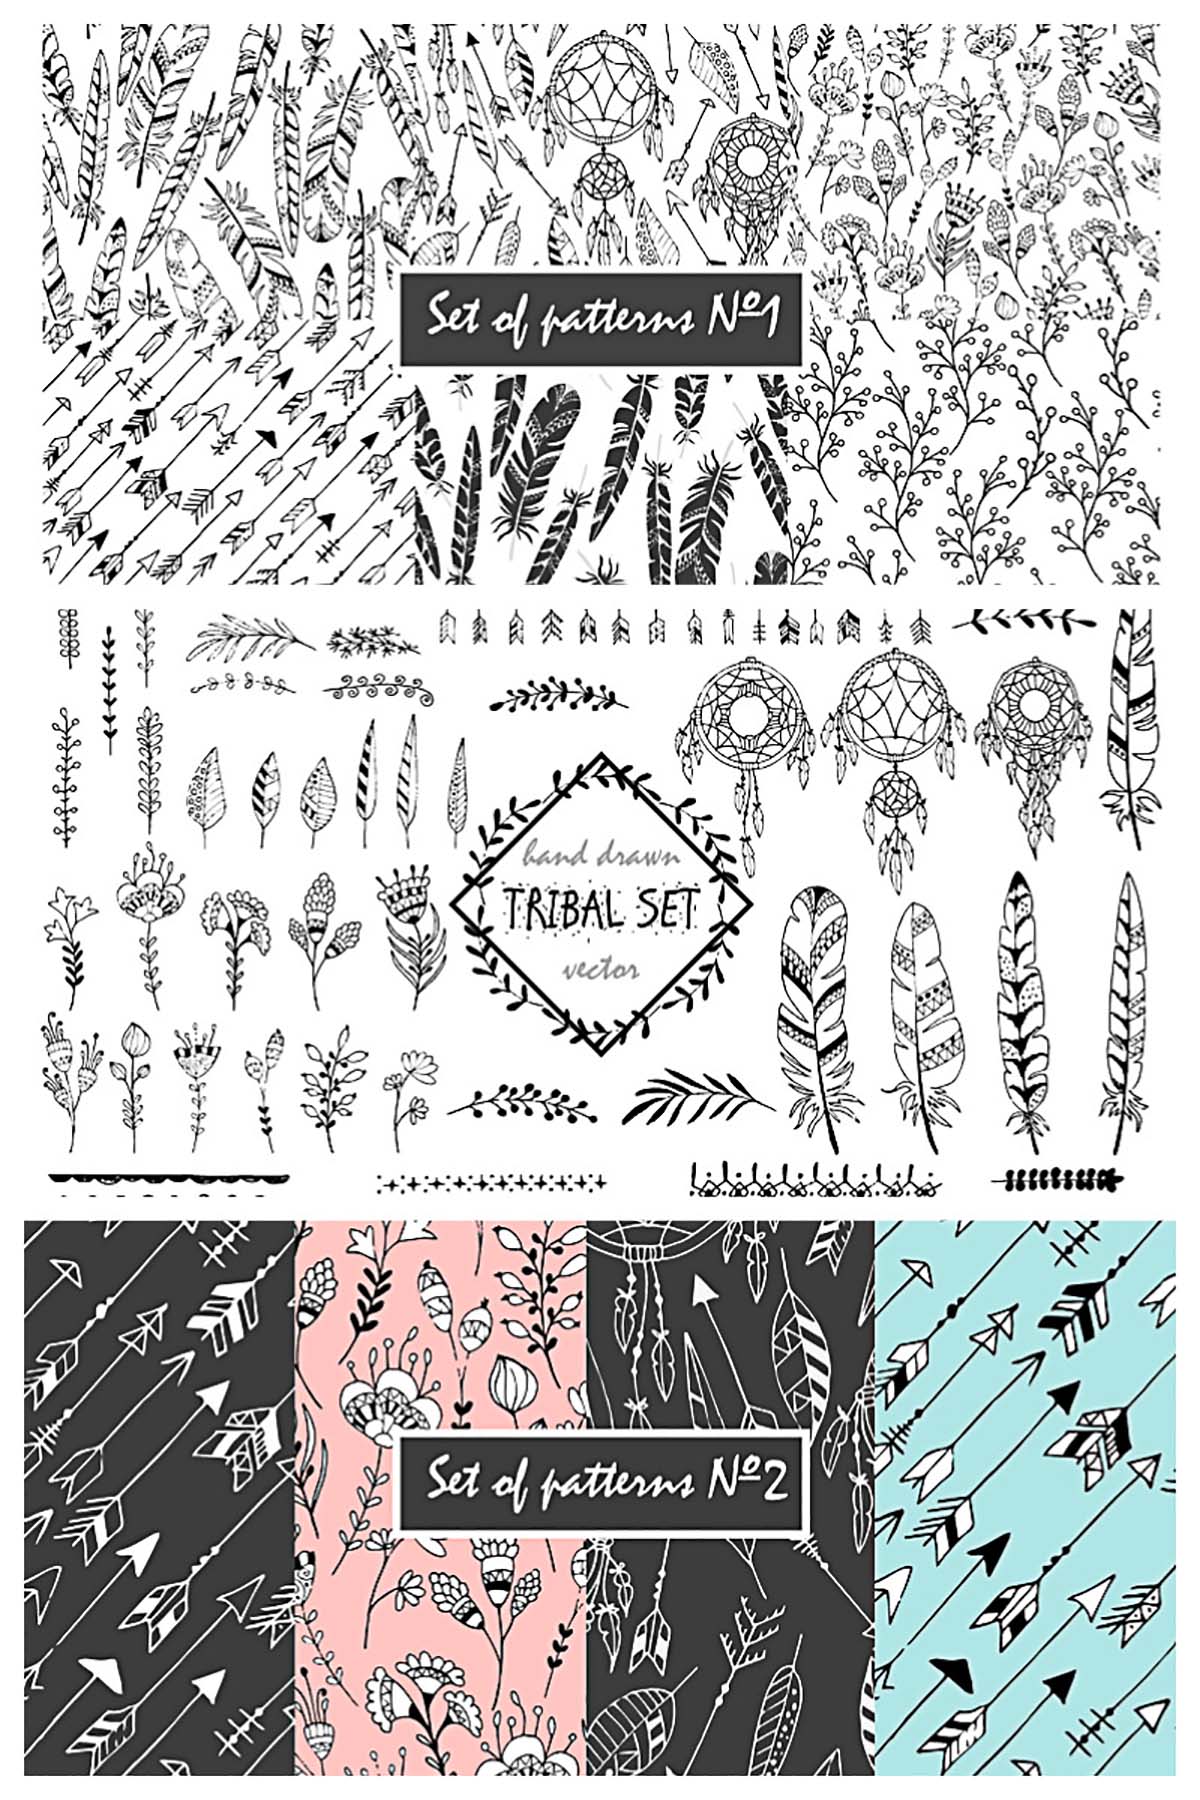 Tribal set of patterns, wreaths and arrows bundle